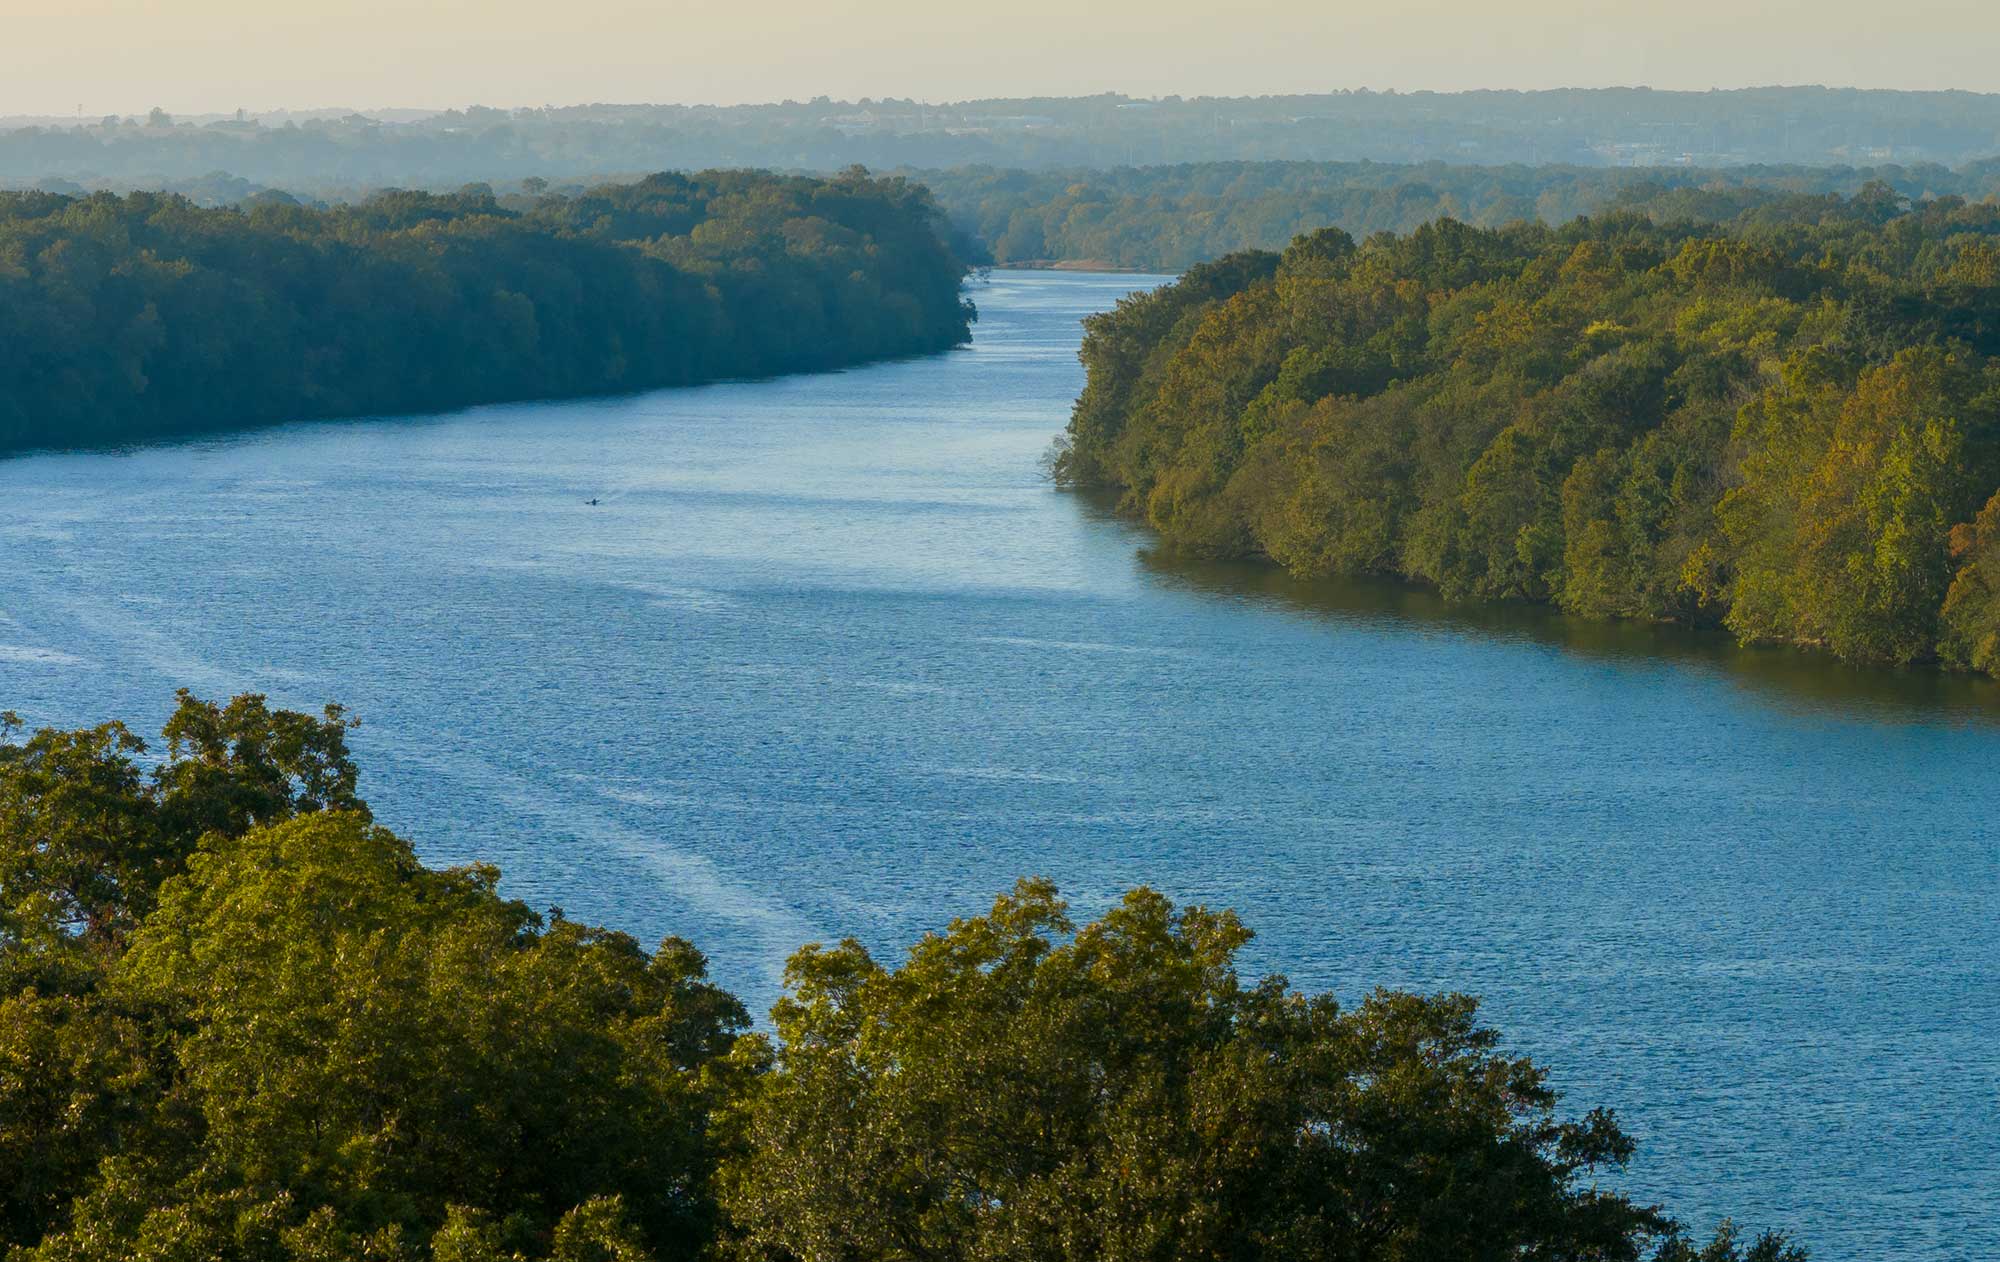 Aerial view of a bend in the Alabama River showing river banks covered with lush green foliage.